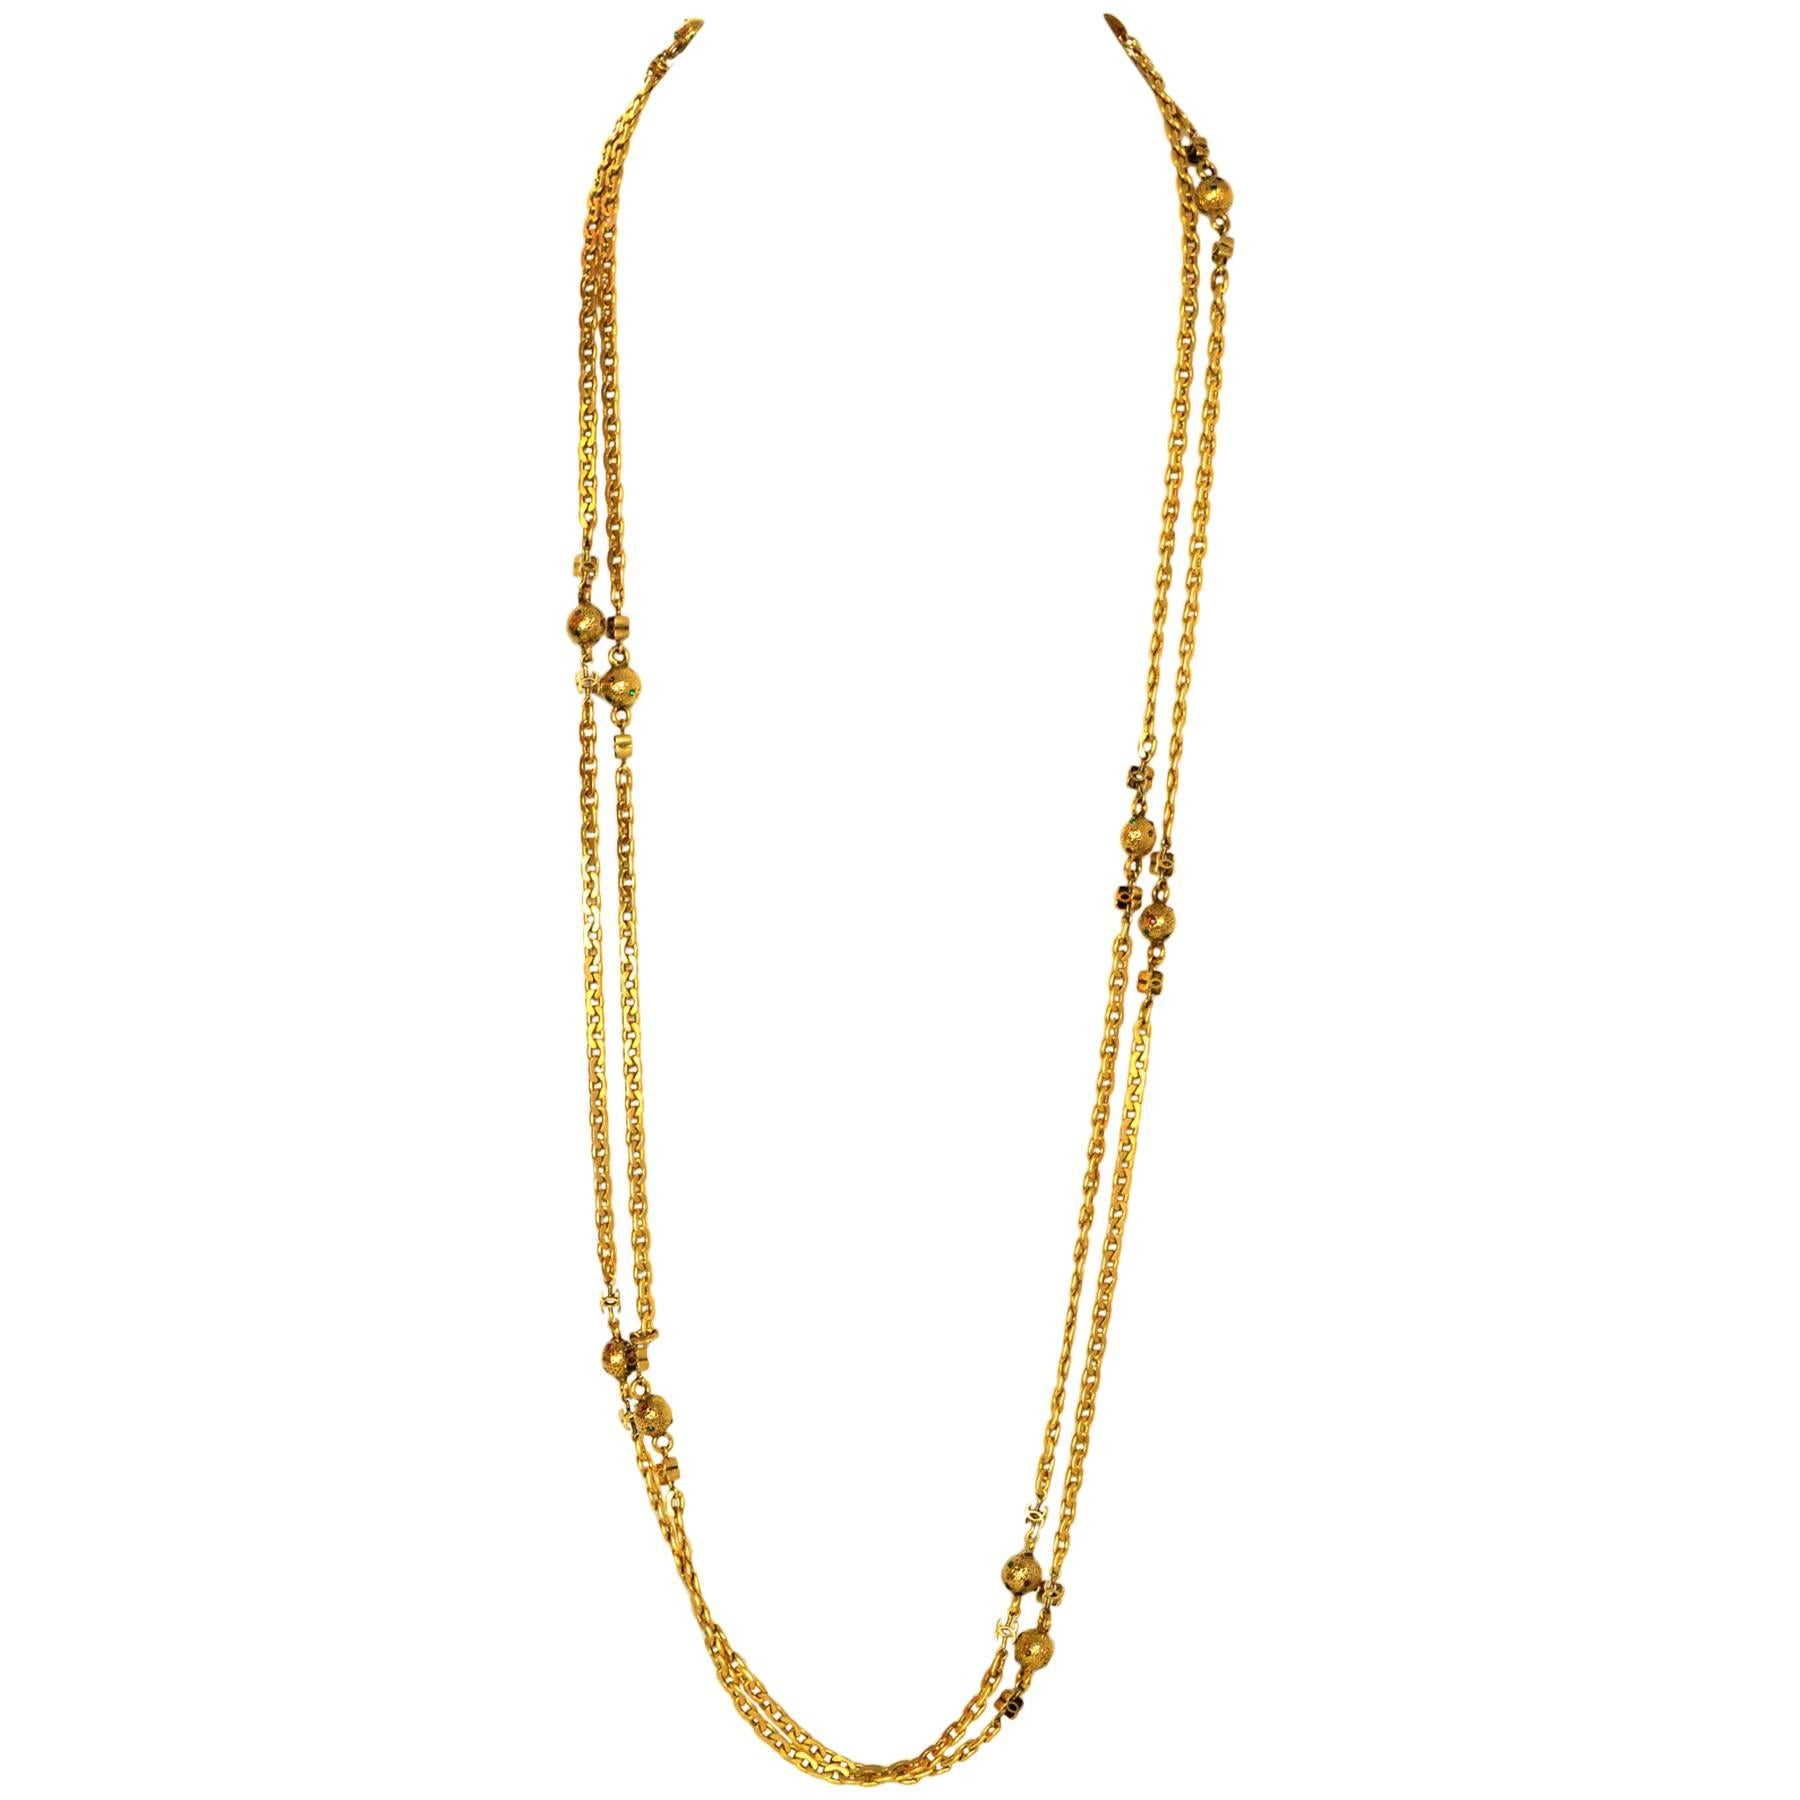 Features flat chain-link strand, CC ornaments and mini ball ornaments with pave milticolor stones

Made in: France
Year of Production: 1982
Stamp: CHANEL CC 1982  MADE IN FRANCE
Closure: Push tab closure
Color: Goldtone
Materials: Metal and